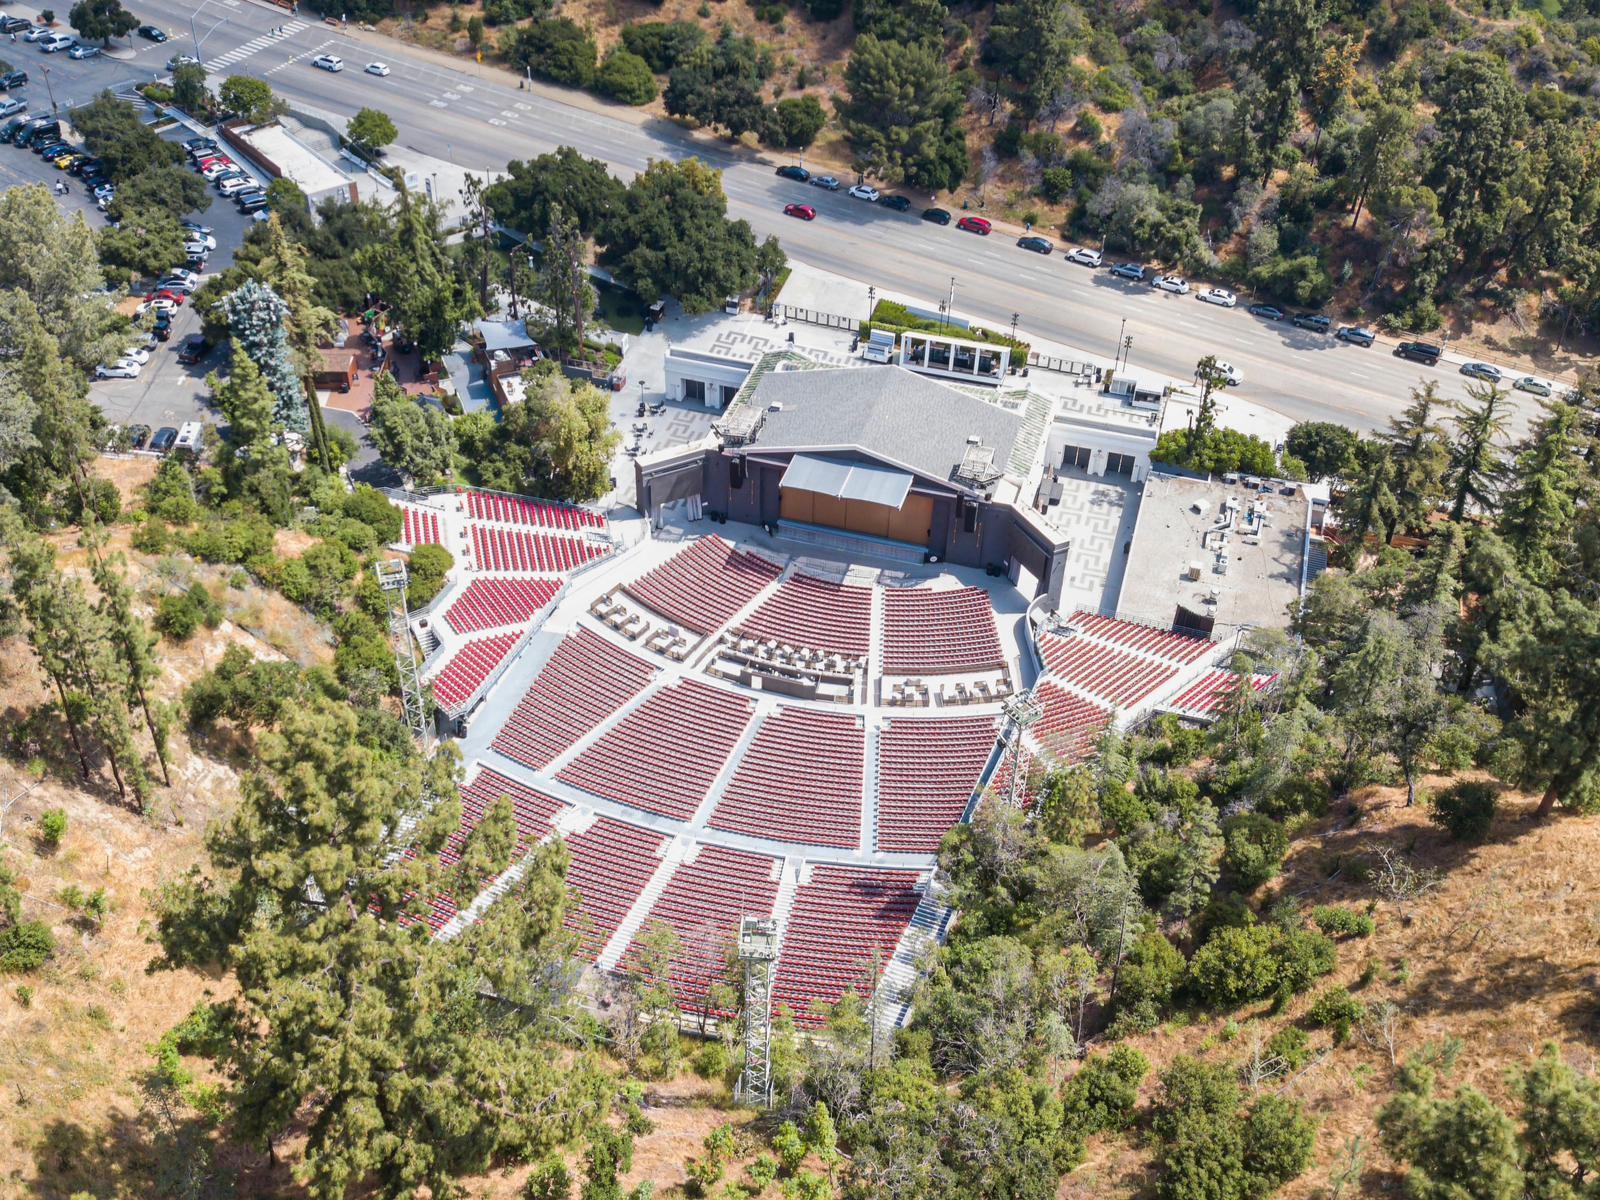 The Greek Theater, one of our picks for the best things to do in Los Angeles, pictured from above